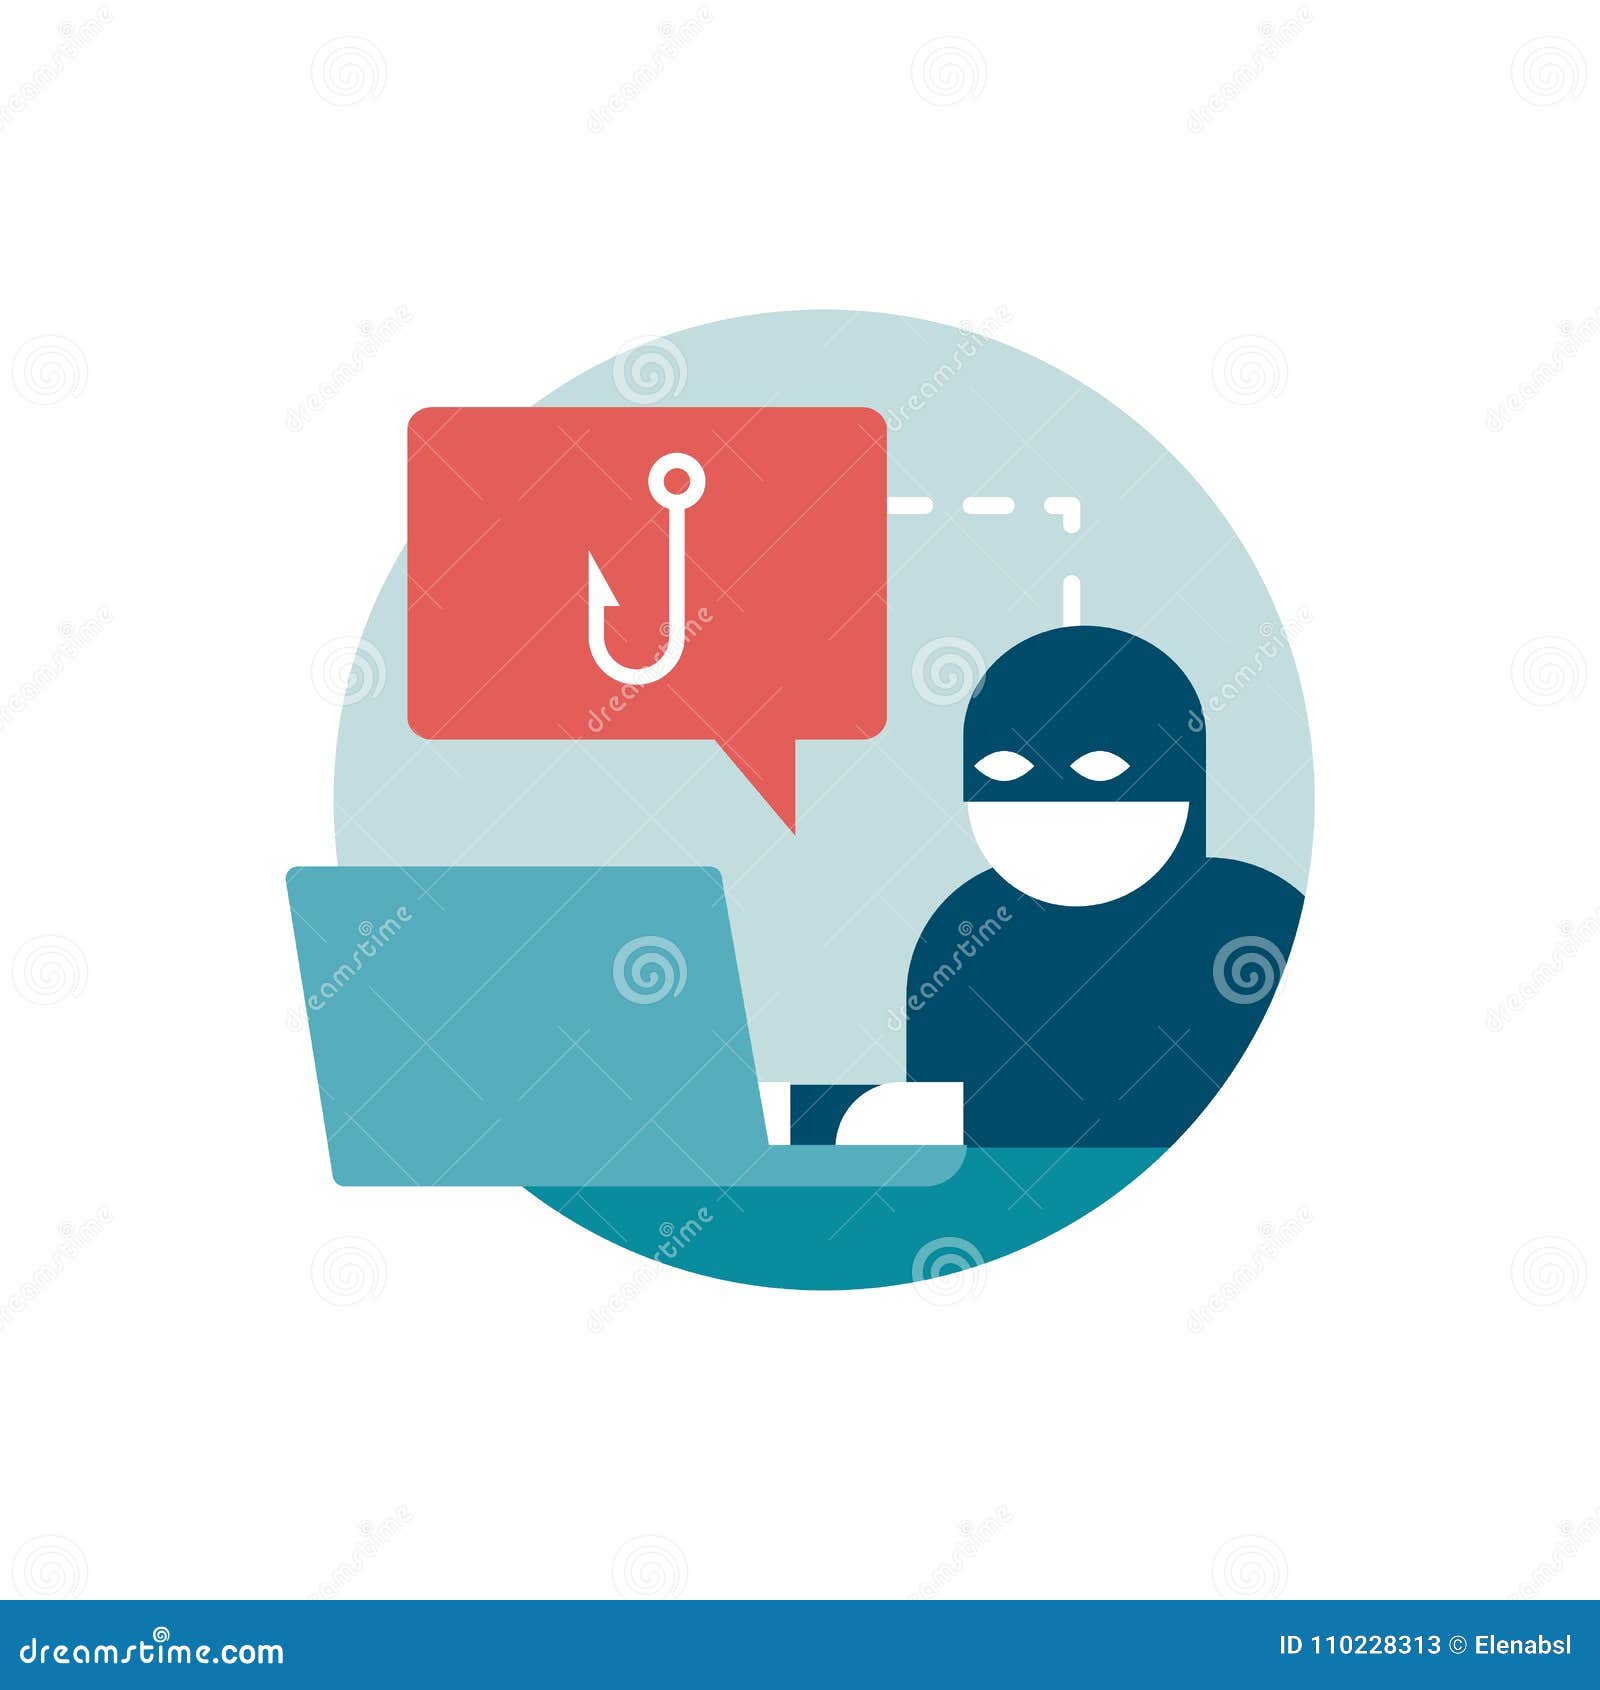 phishing and scam